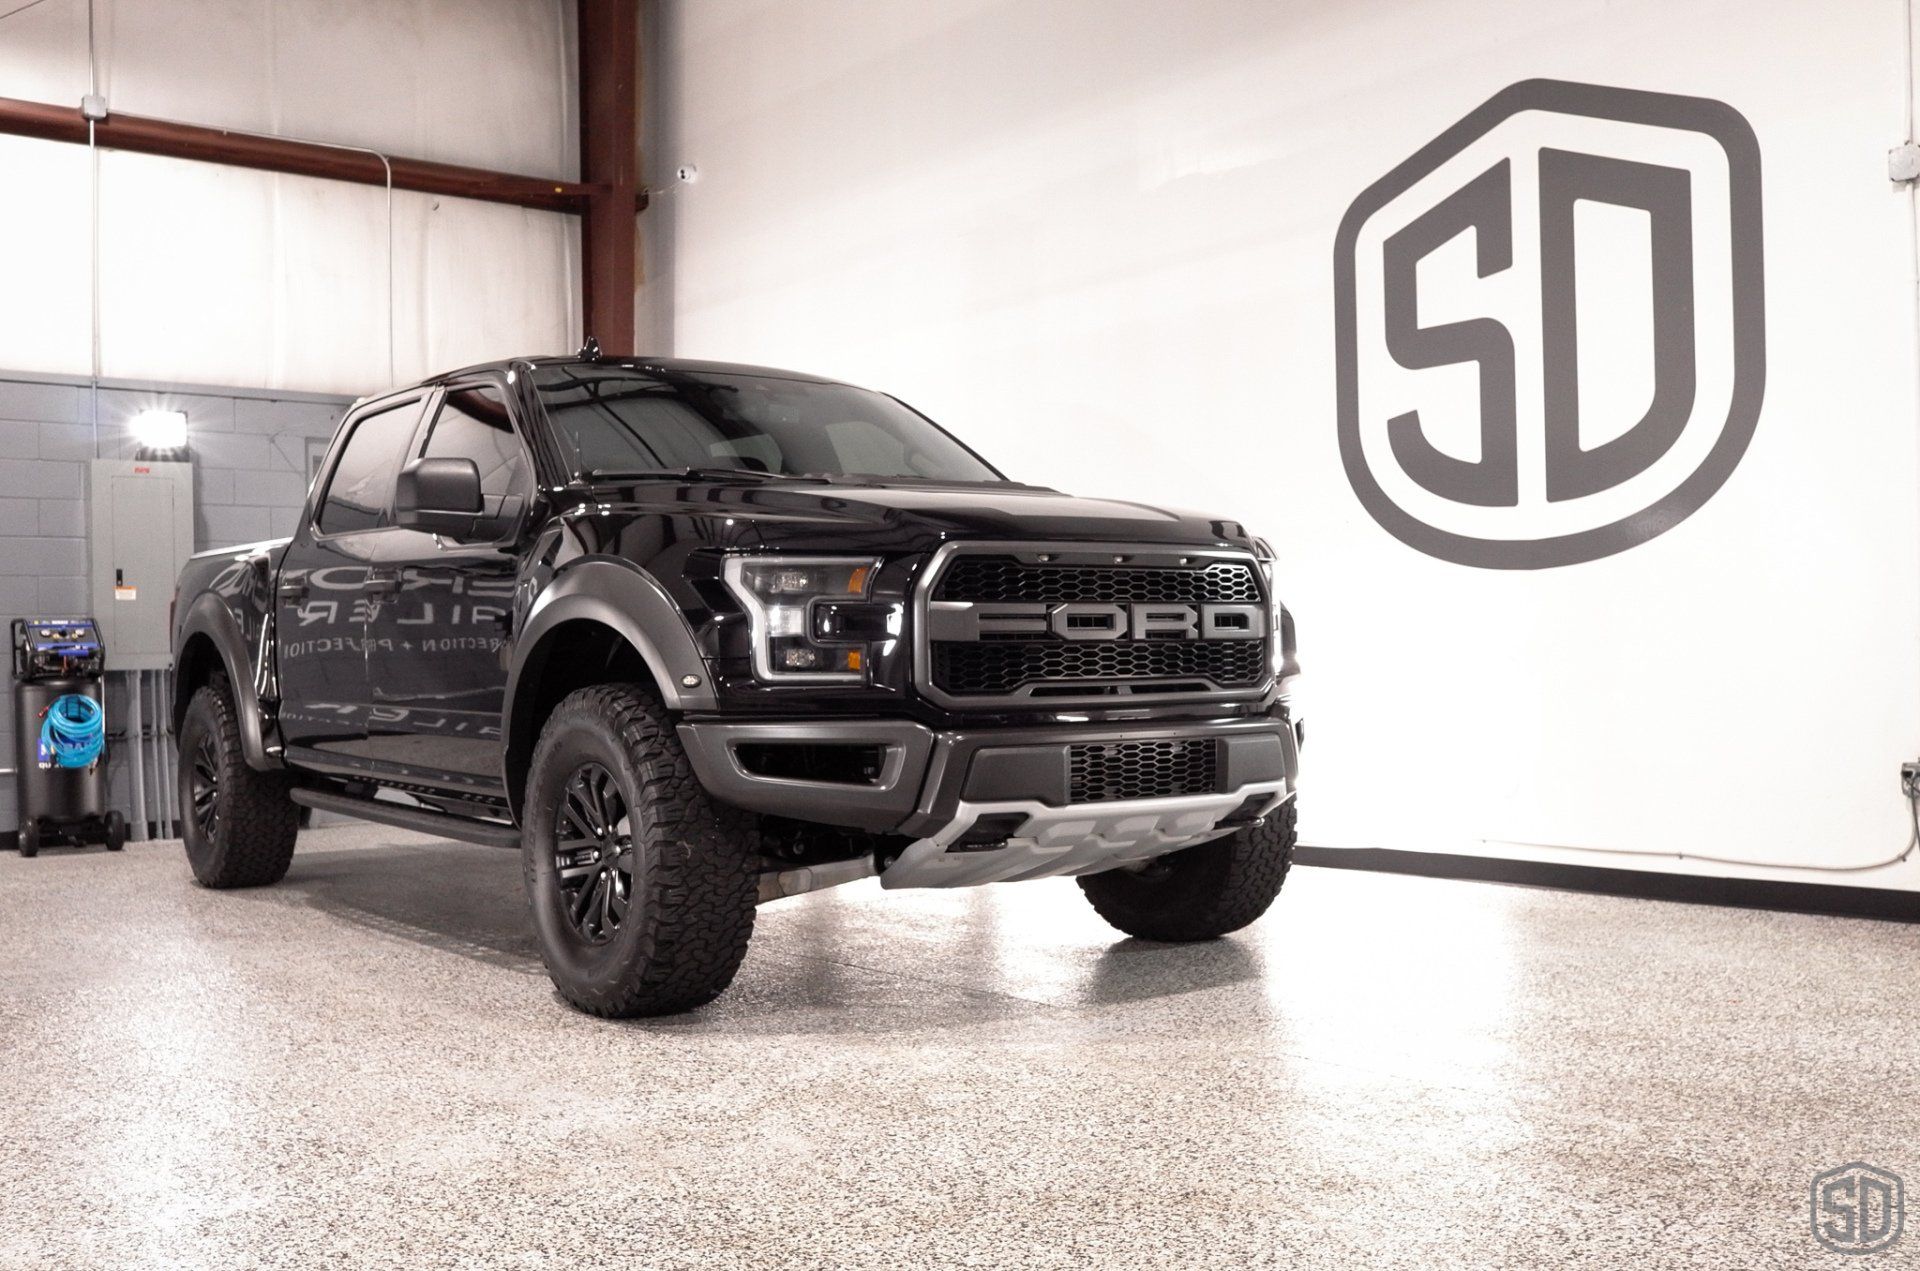 Paint Protection Film, Ford Raptor